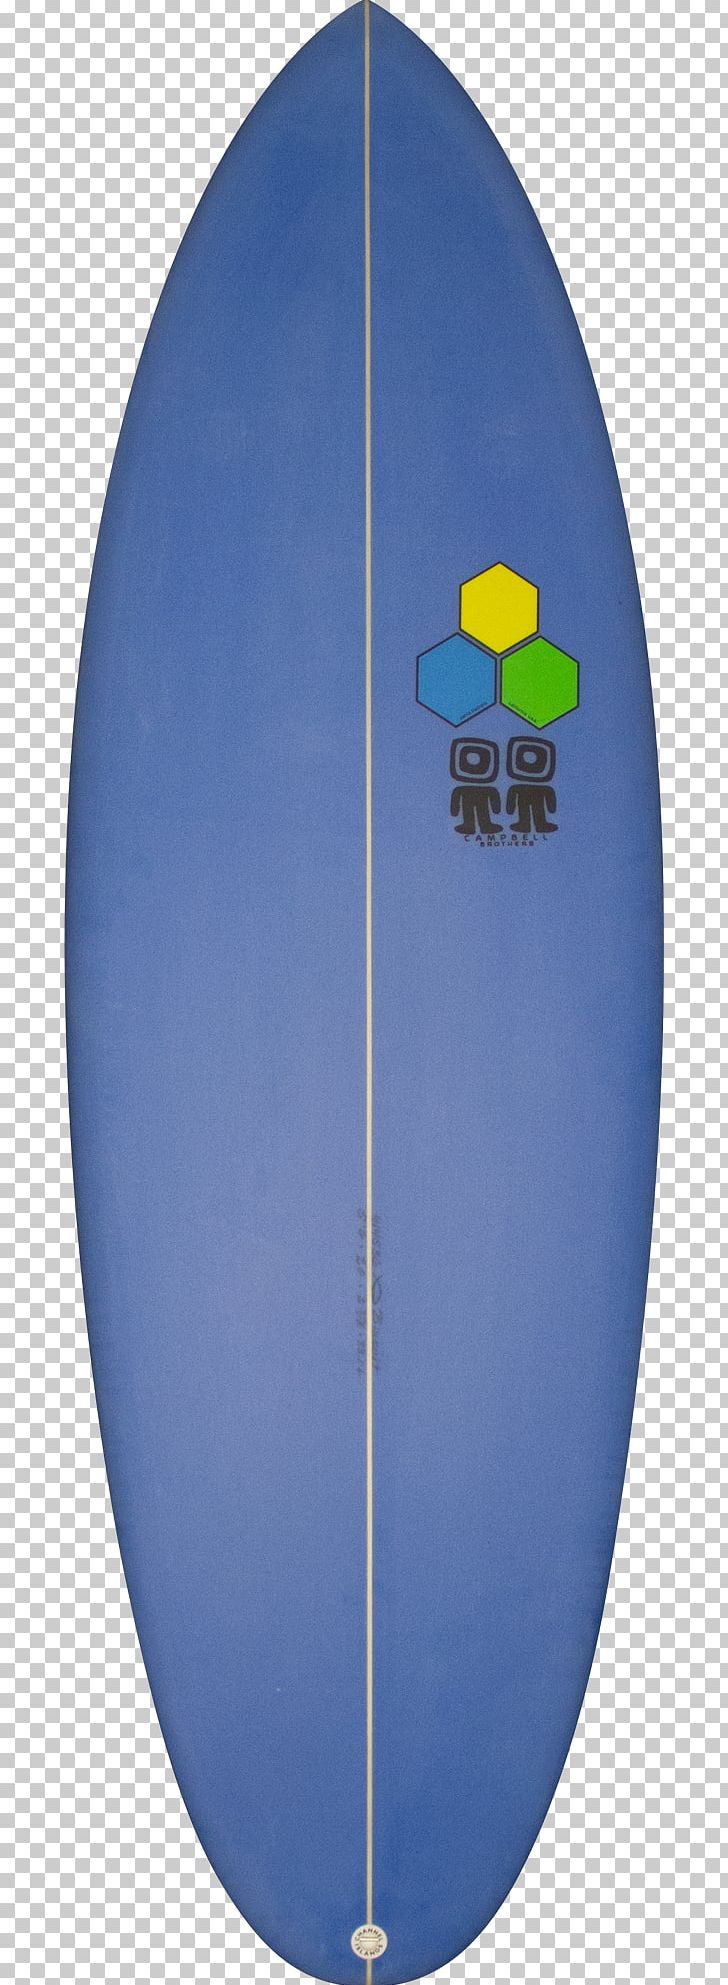 Channel Islands Bonzer Surfing Surfboard New Flyer PNG, Clipart, Biscuit, Bonzer, Channel Islands, Circle, Cycling Free PNG Download